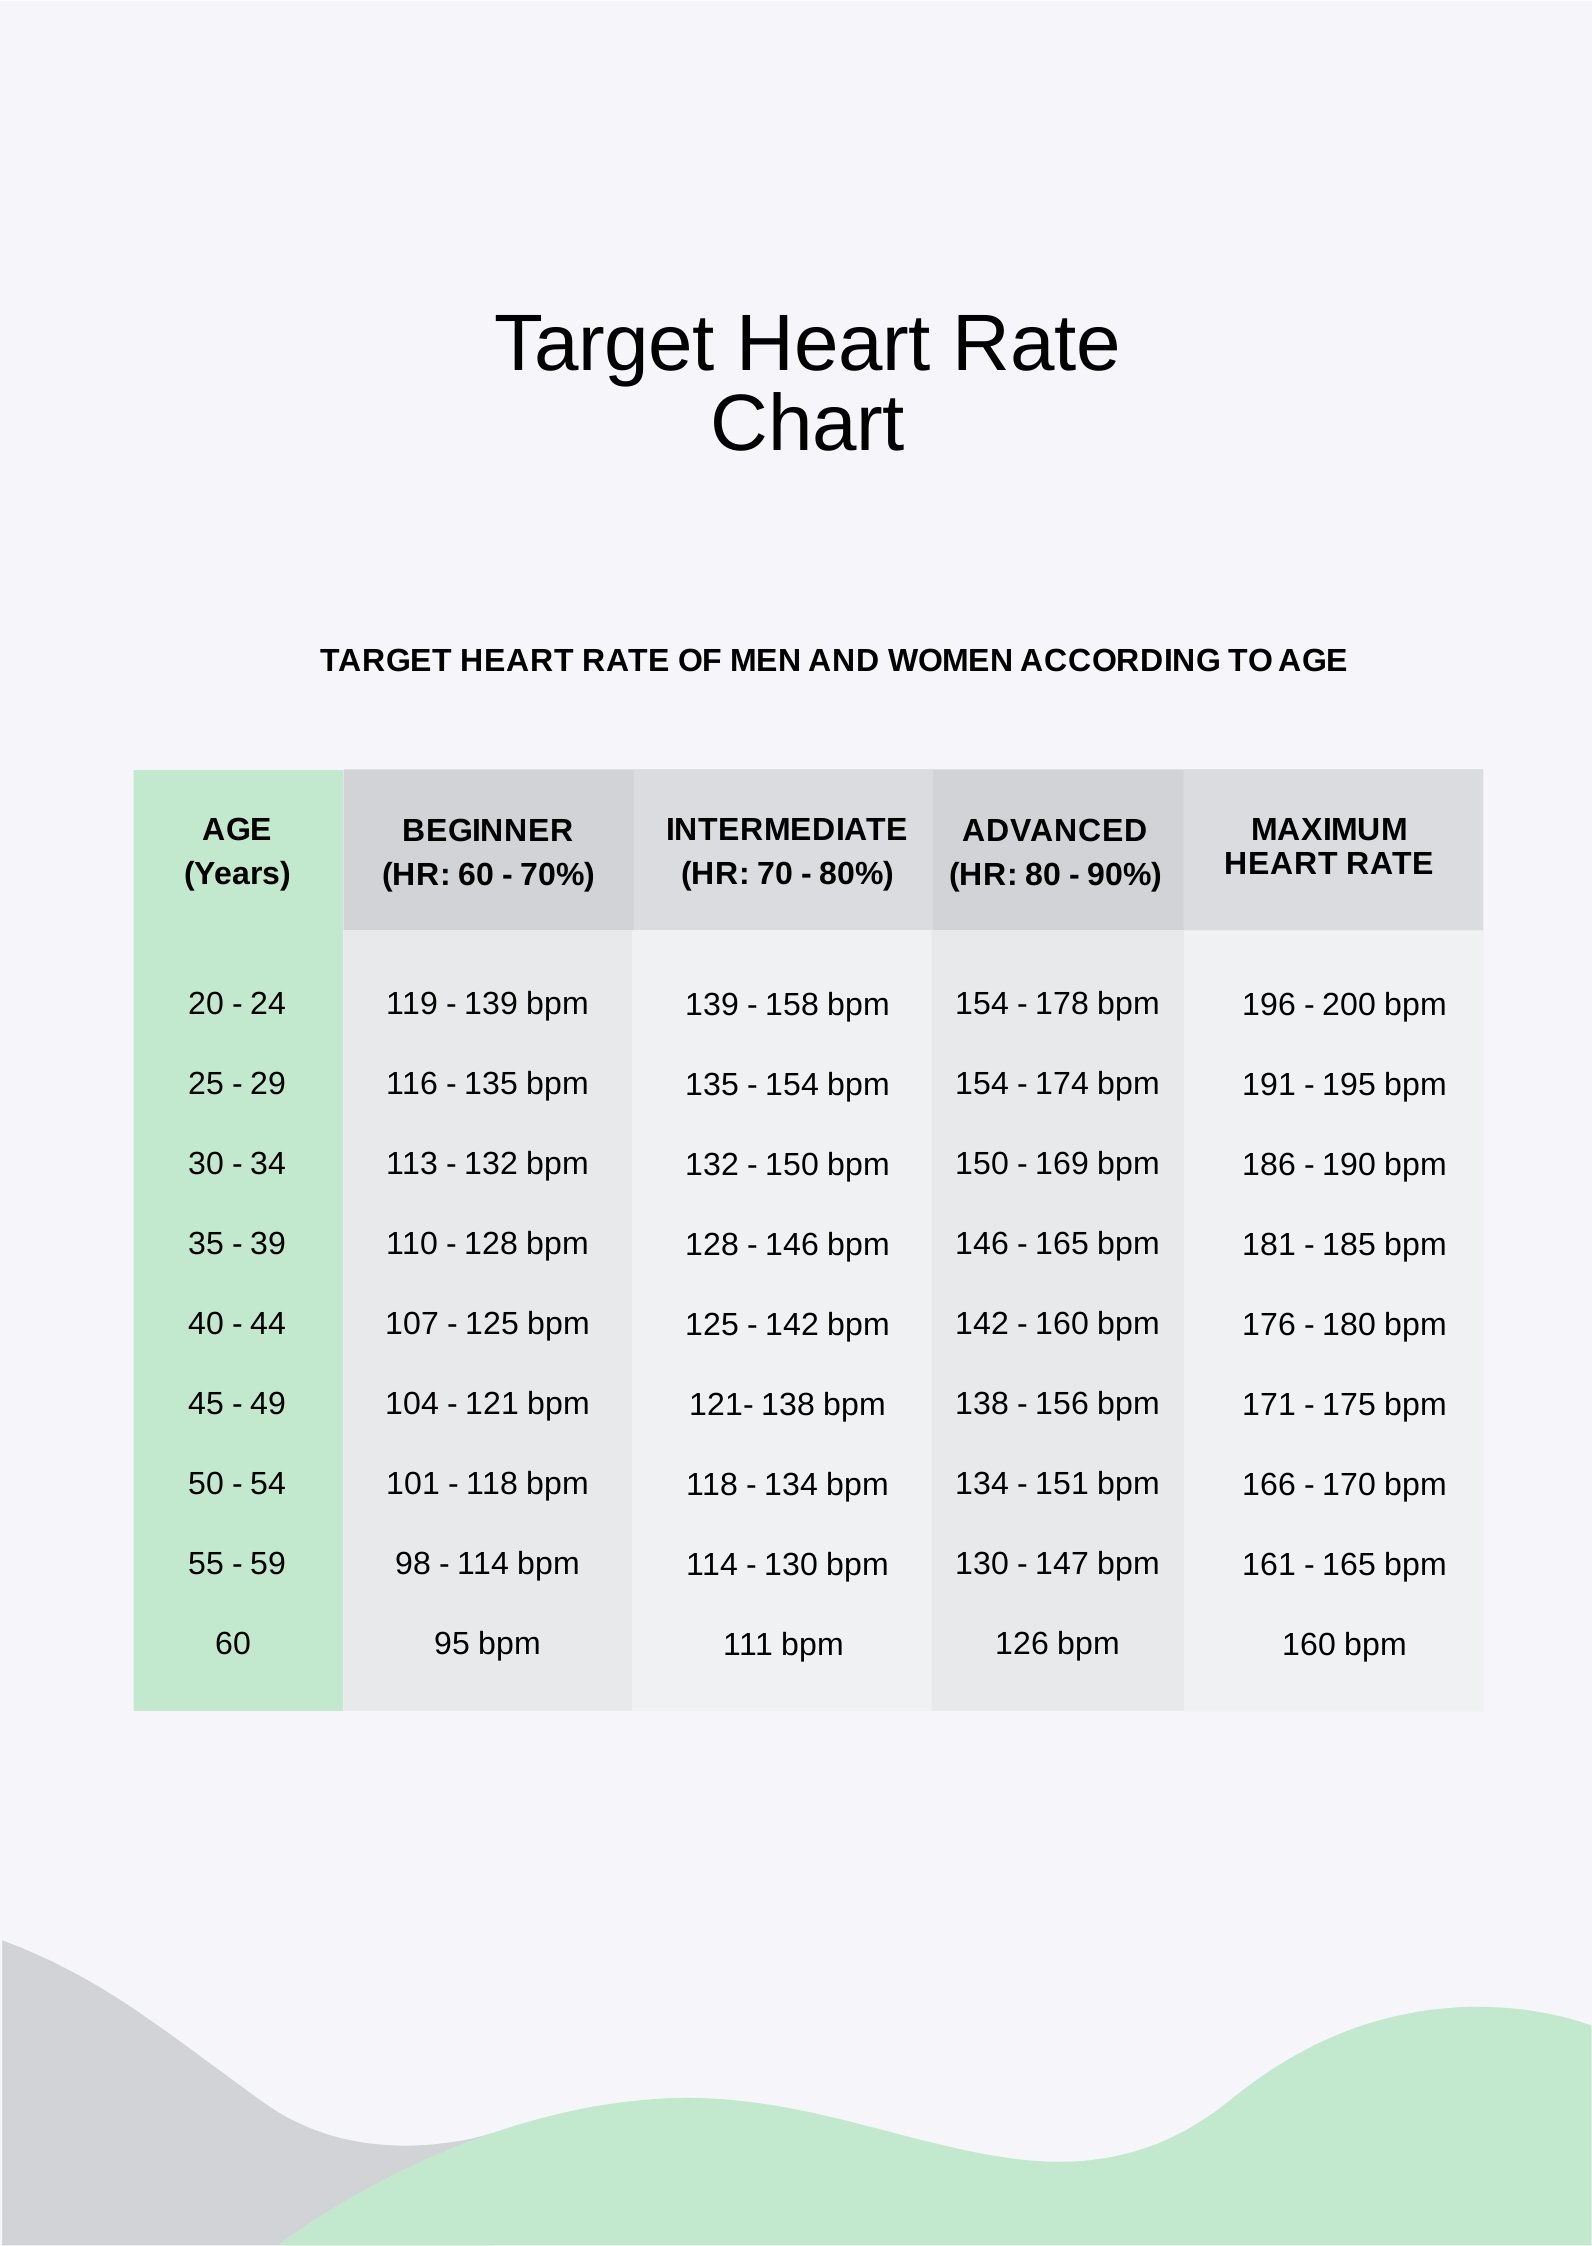 Target Heart Rate Chart in PDF